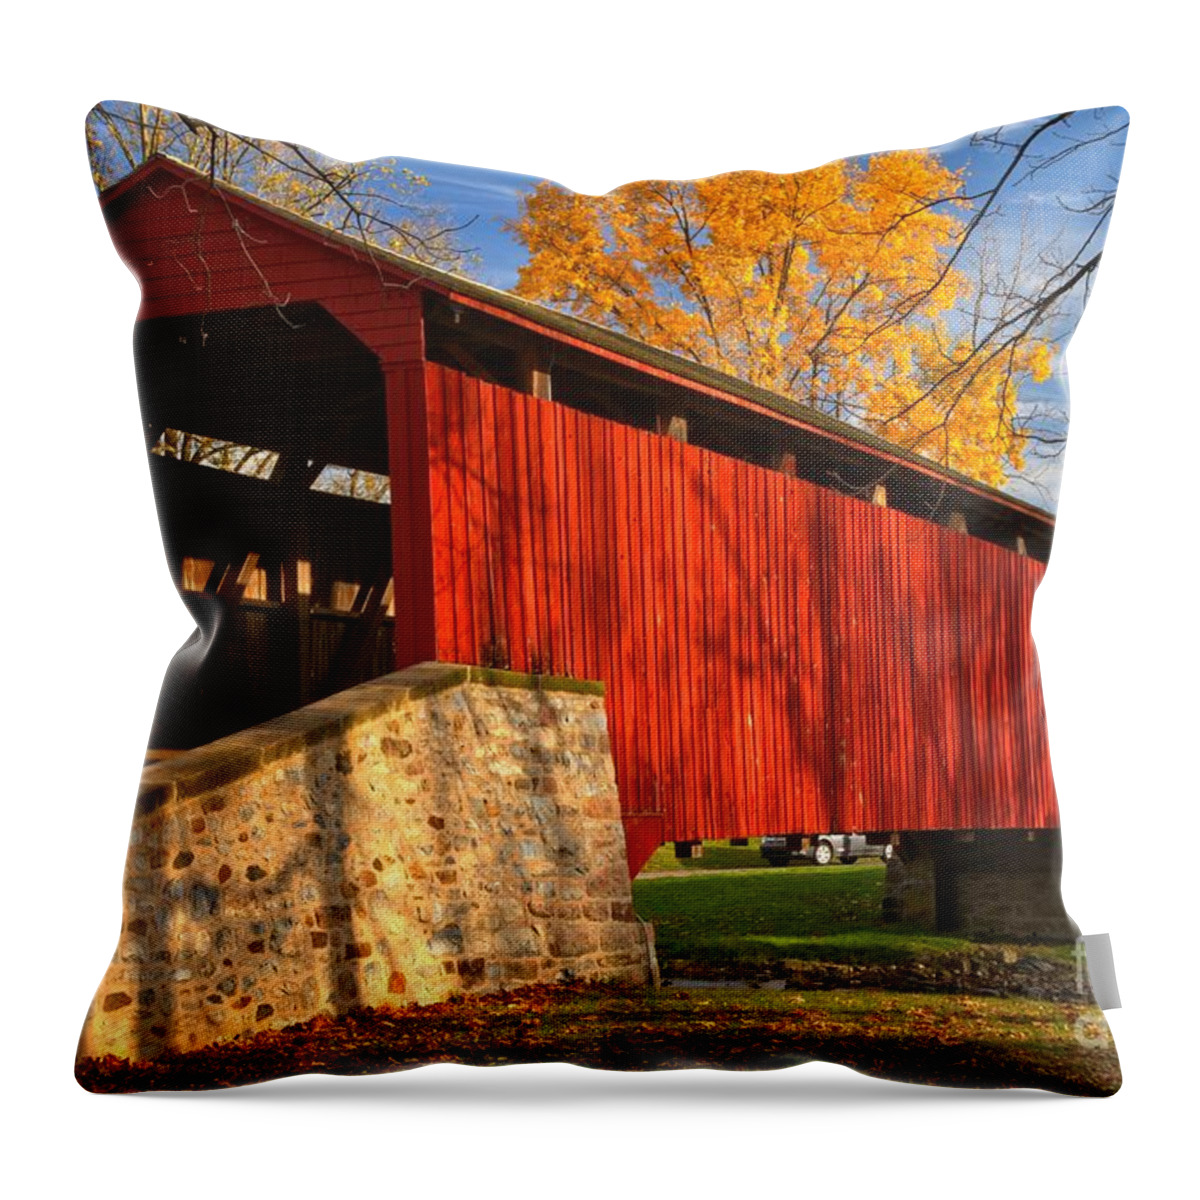 Poole Forge Covered Bridge Throw Pillow featuring the photograph Gold Above The Poole Forge Covered Bridge by Adam Jewell